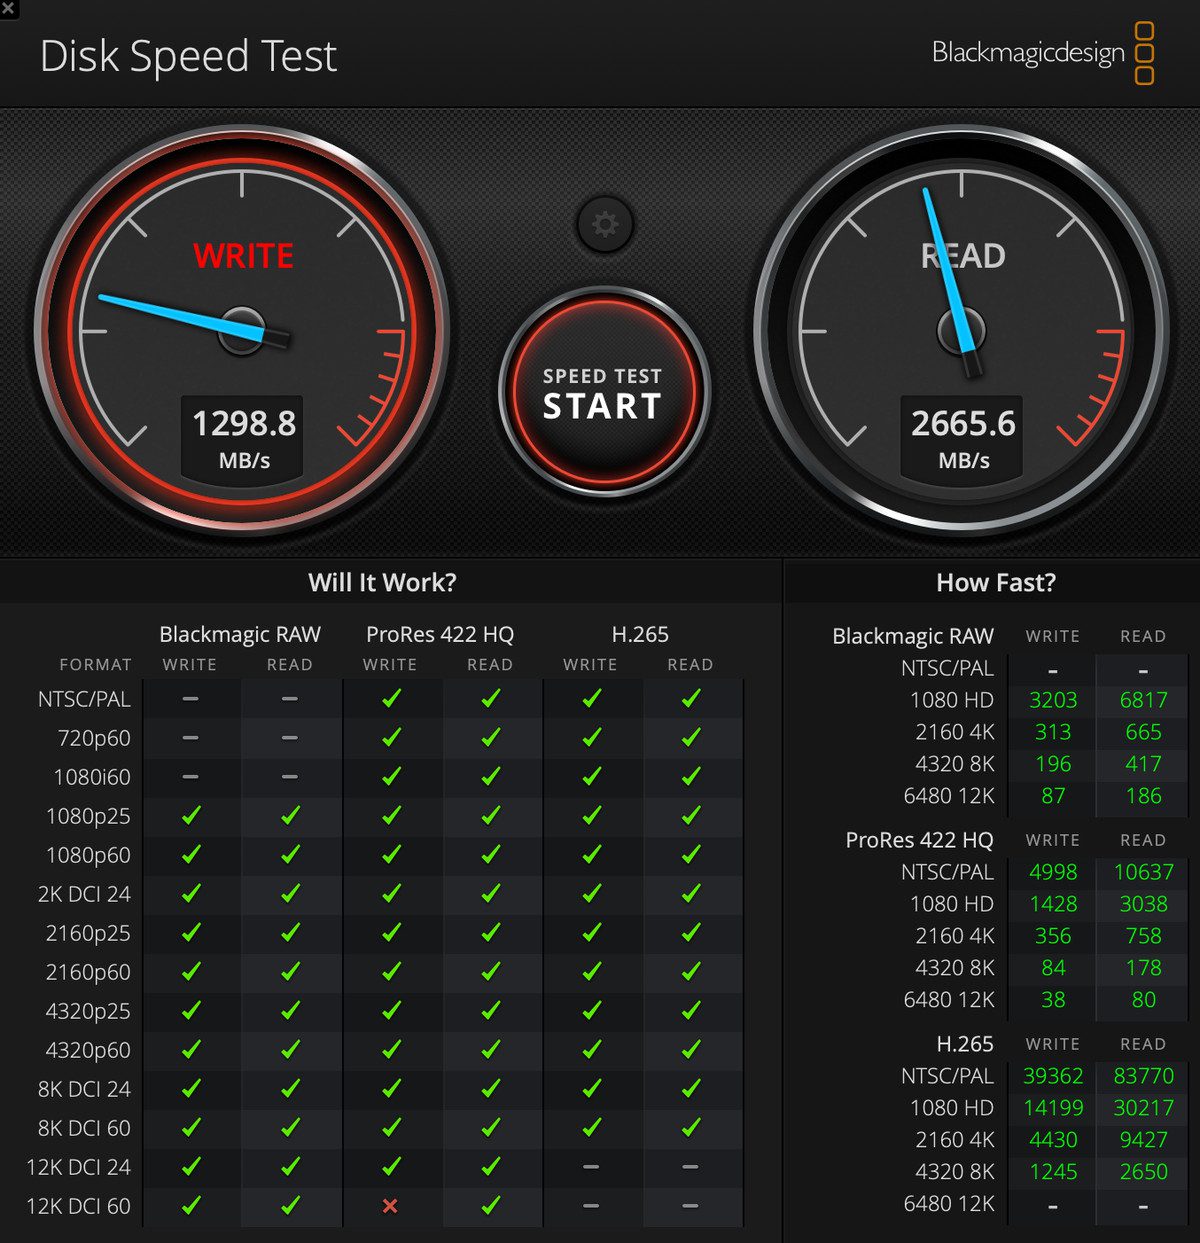 Screenshot of Blackmagic Disk Speed ​​Test indicating scores of 1298.8 for writing and 2665.6 for reading.